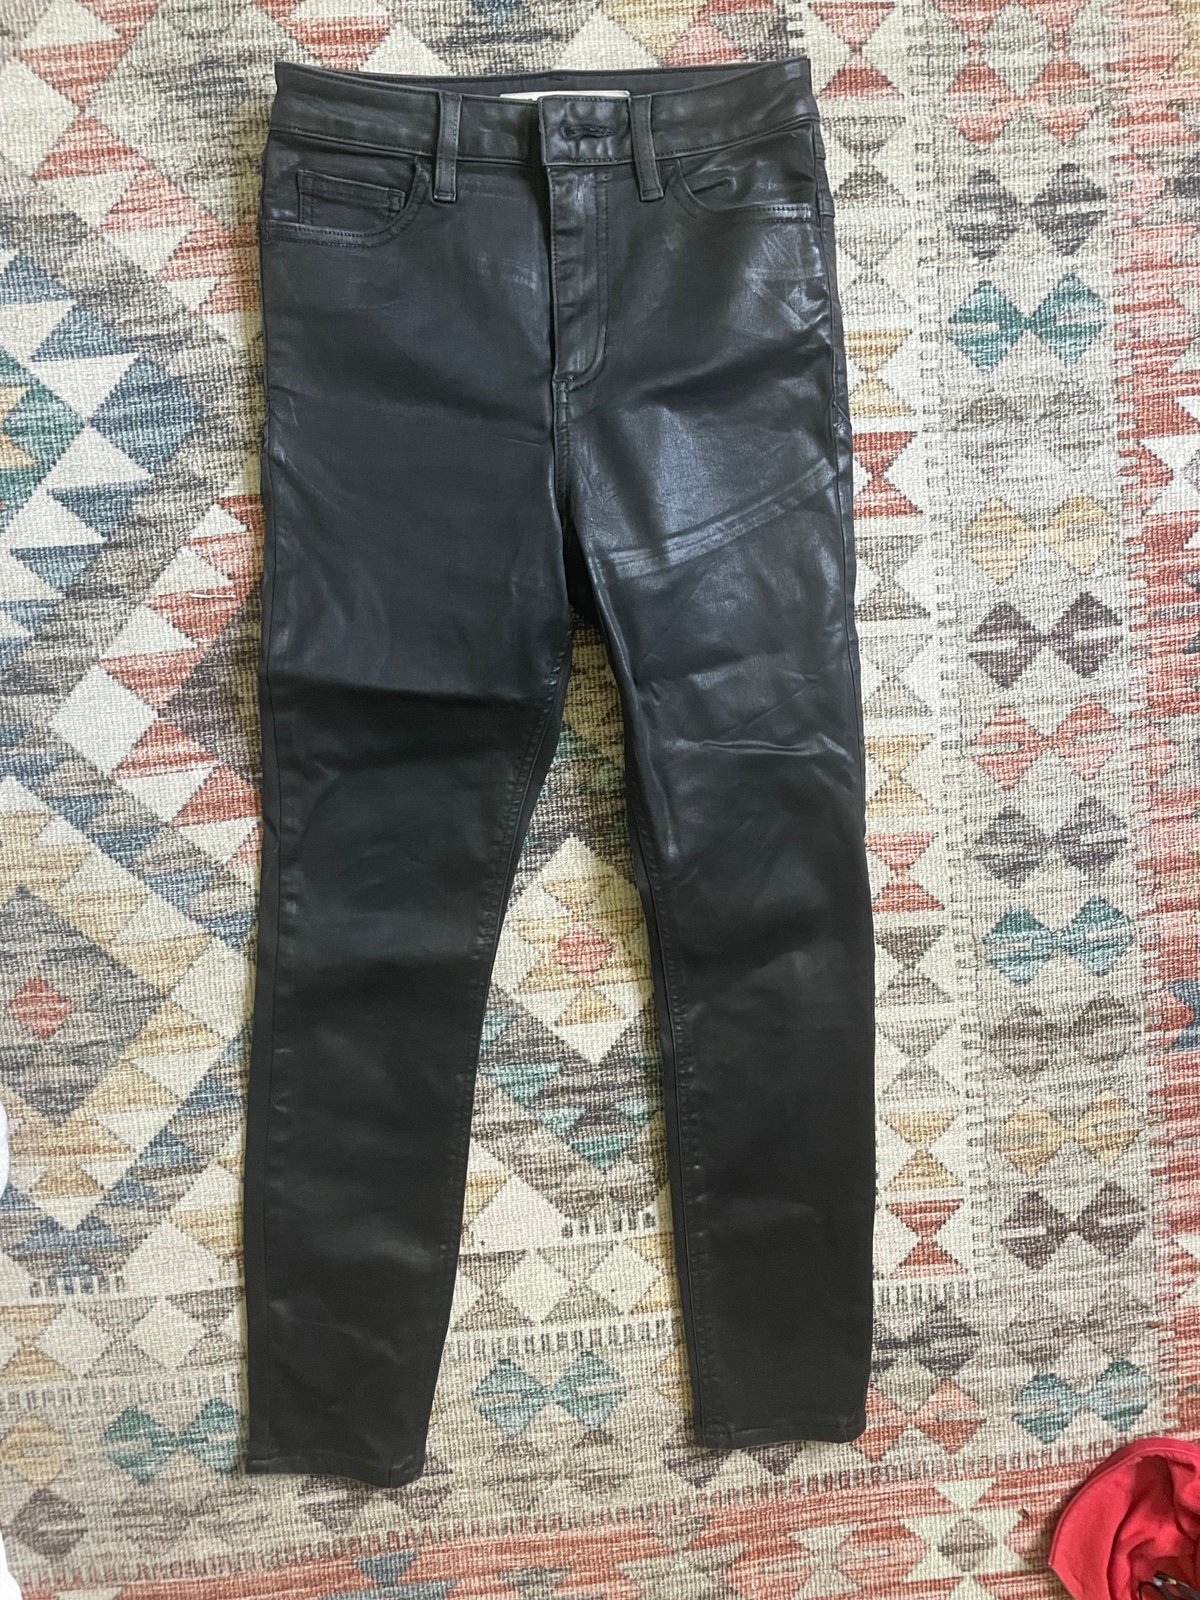 the Lowest price ASOS faux leather pants LyaxT5yWx Nove